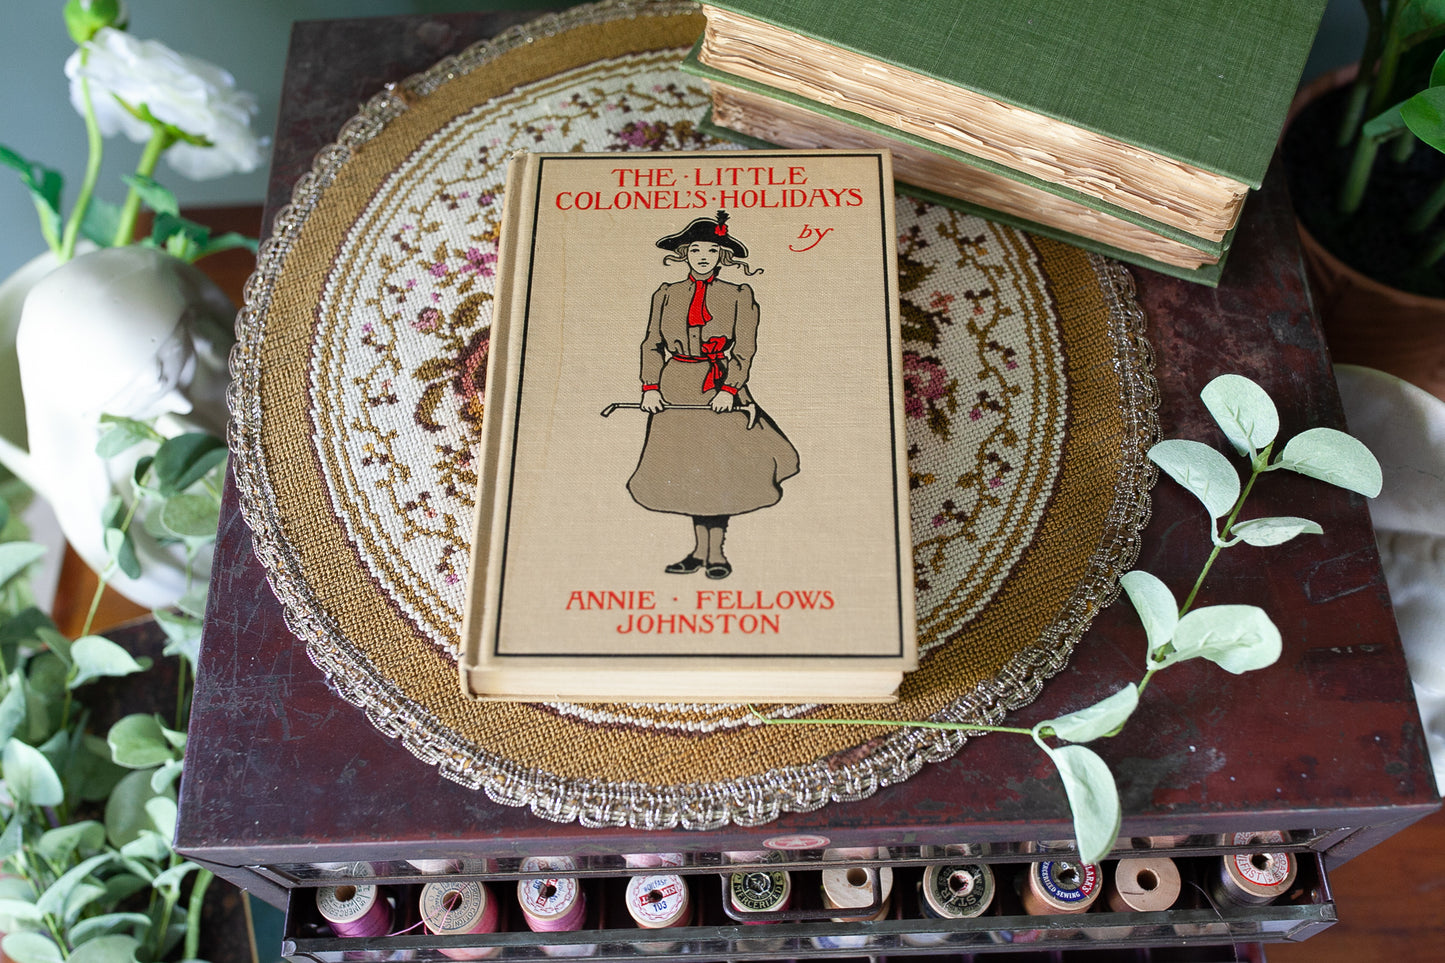 The Little Colonel's Holidays by Annie Fellows Johnston- Antique Book 1910 - Great Cover and Spine